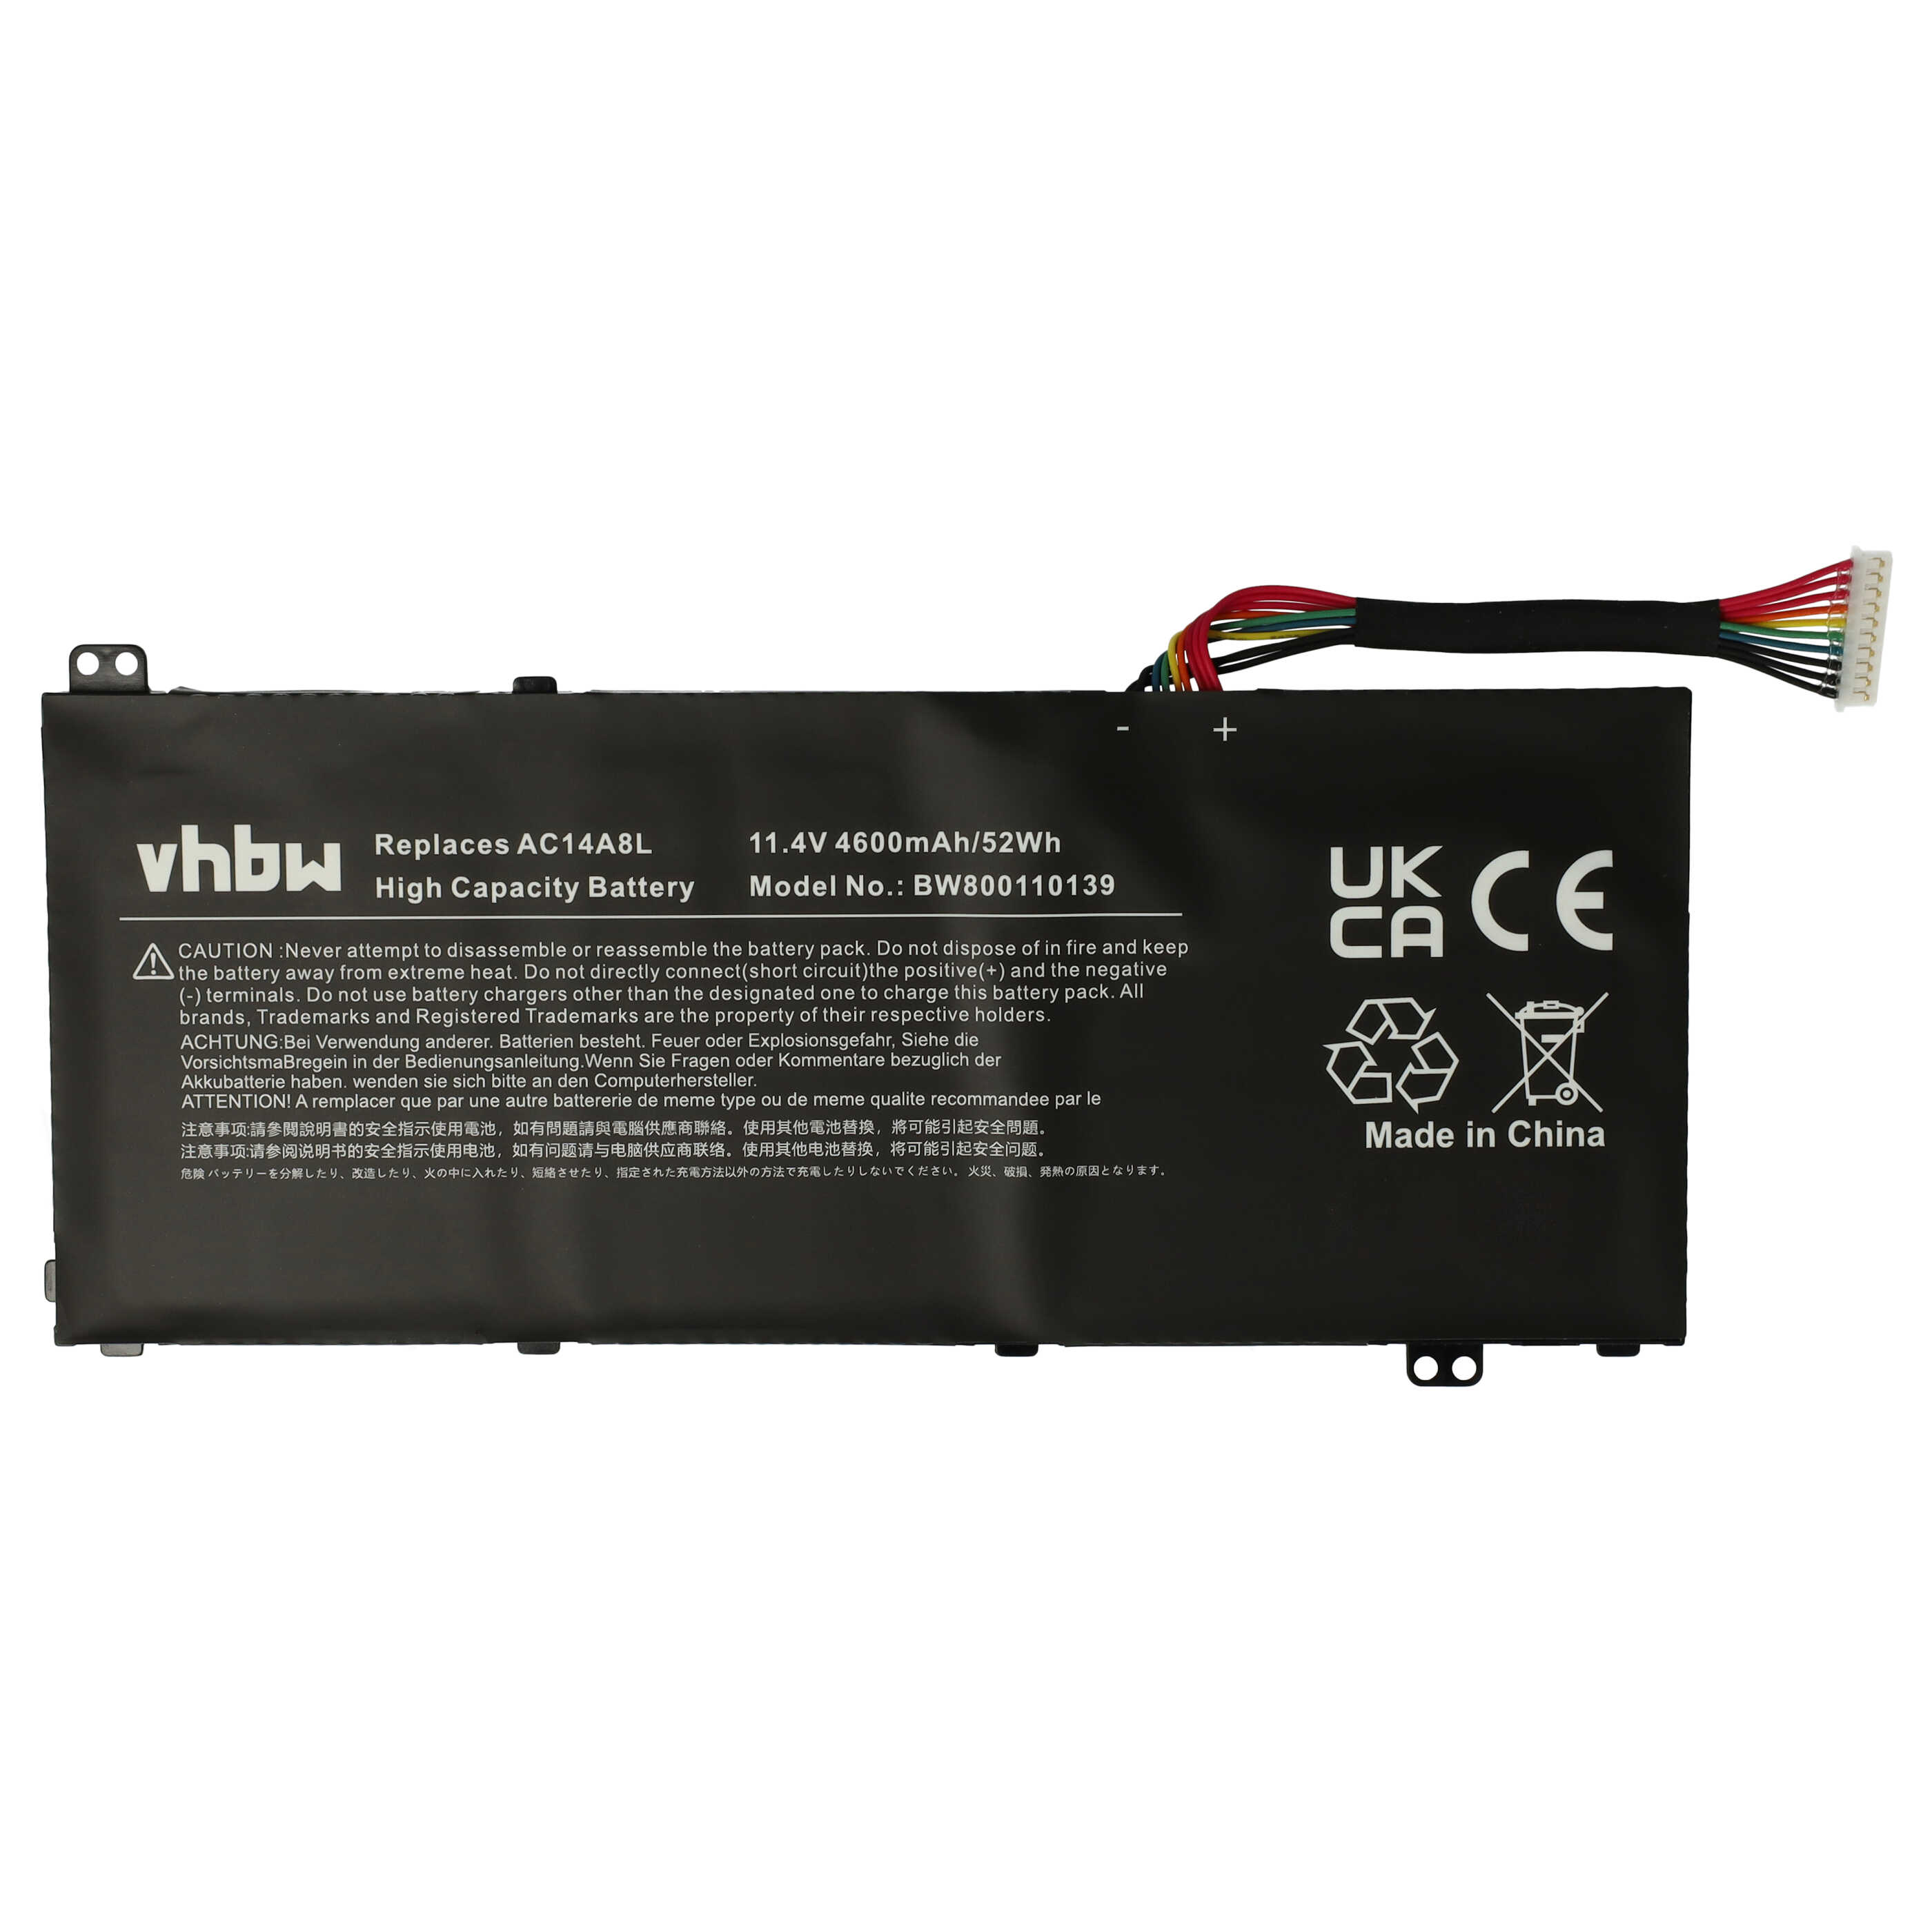 Notebook Battery Replacement for Acer 3ICP7/61/80, AC14A8L - 4600mAh 11.4V Li-polymer, black